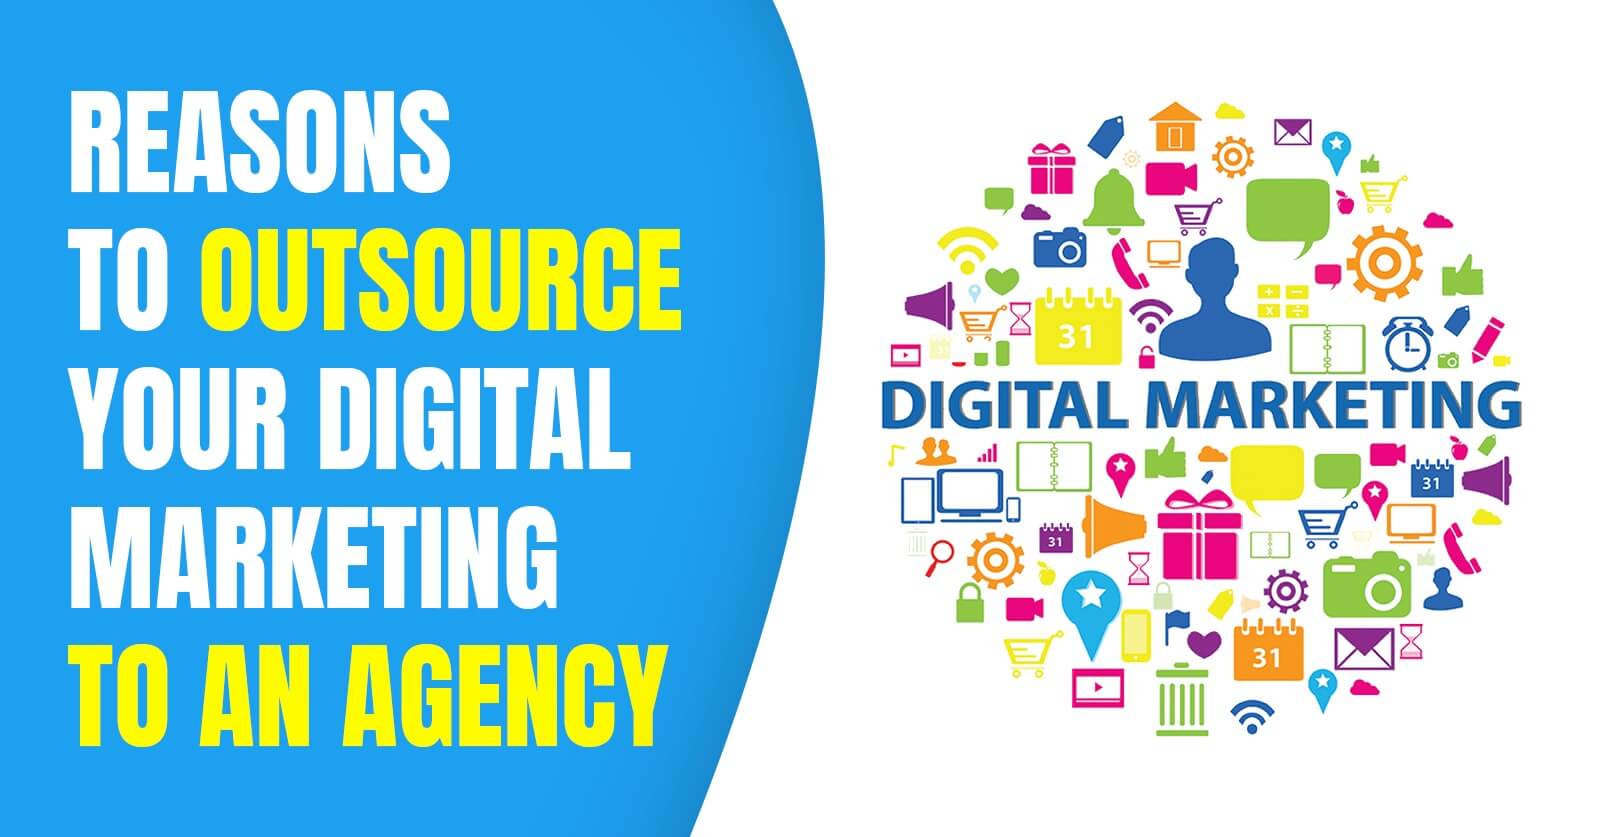 Reasons to Outsource Your Digital Marketing to an Agency